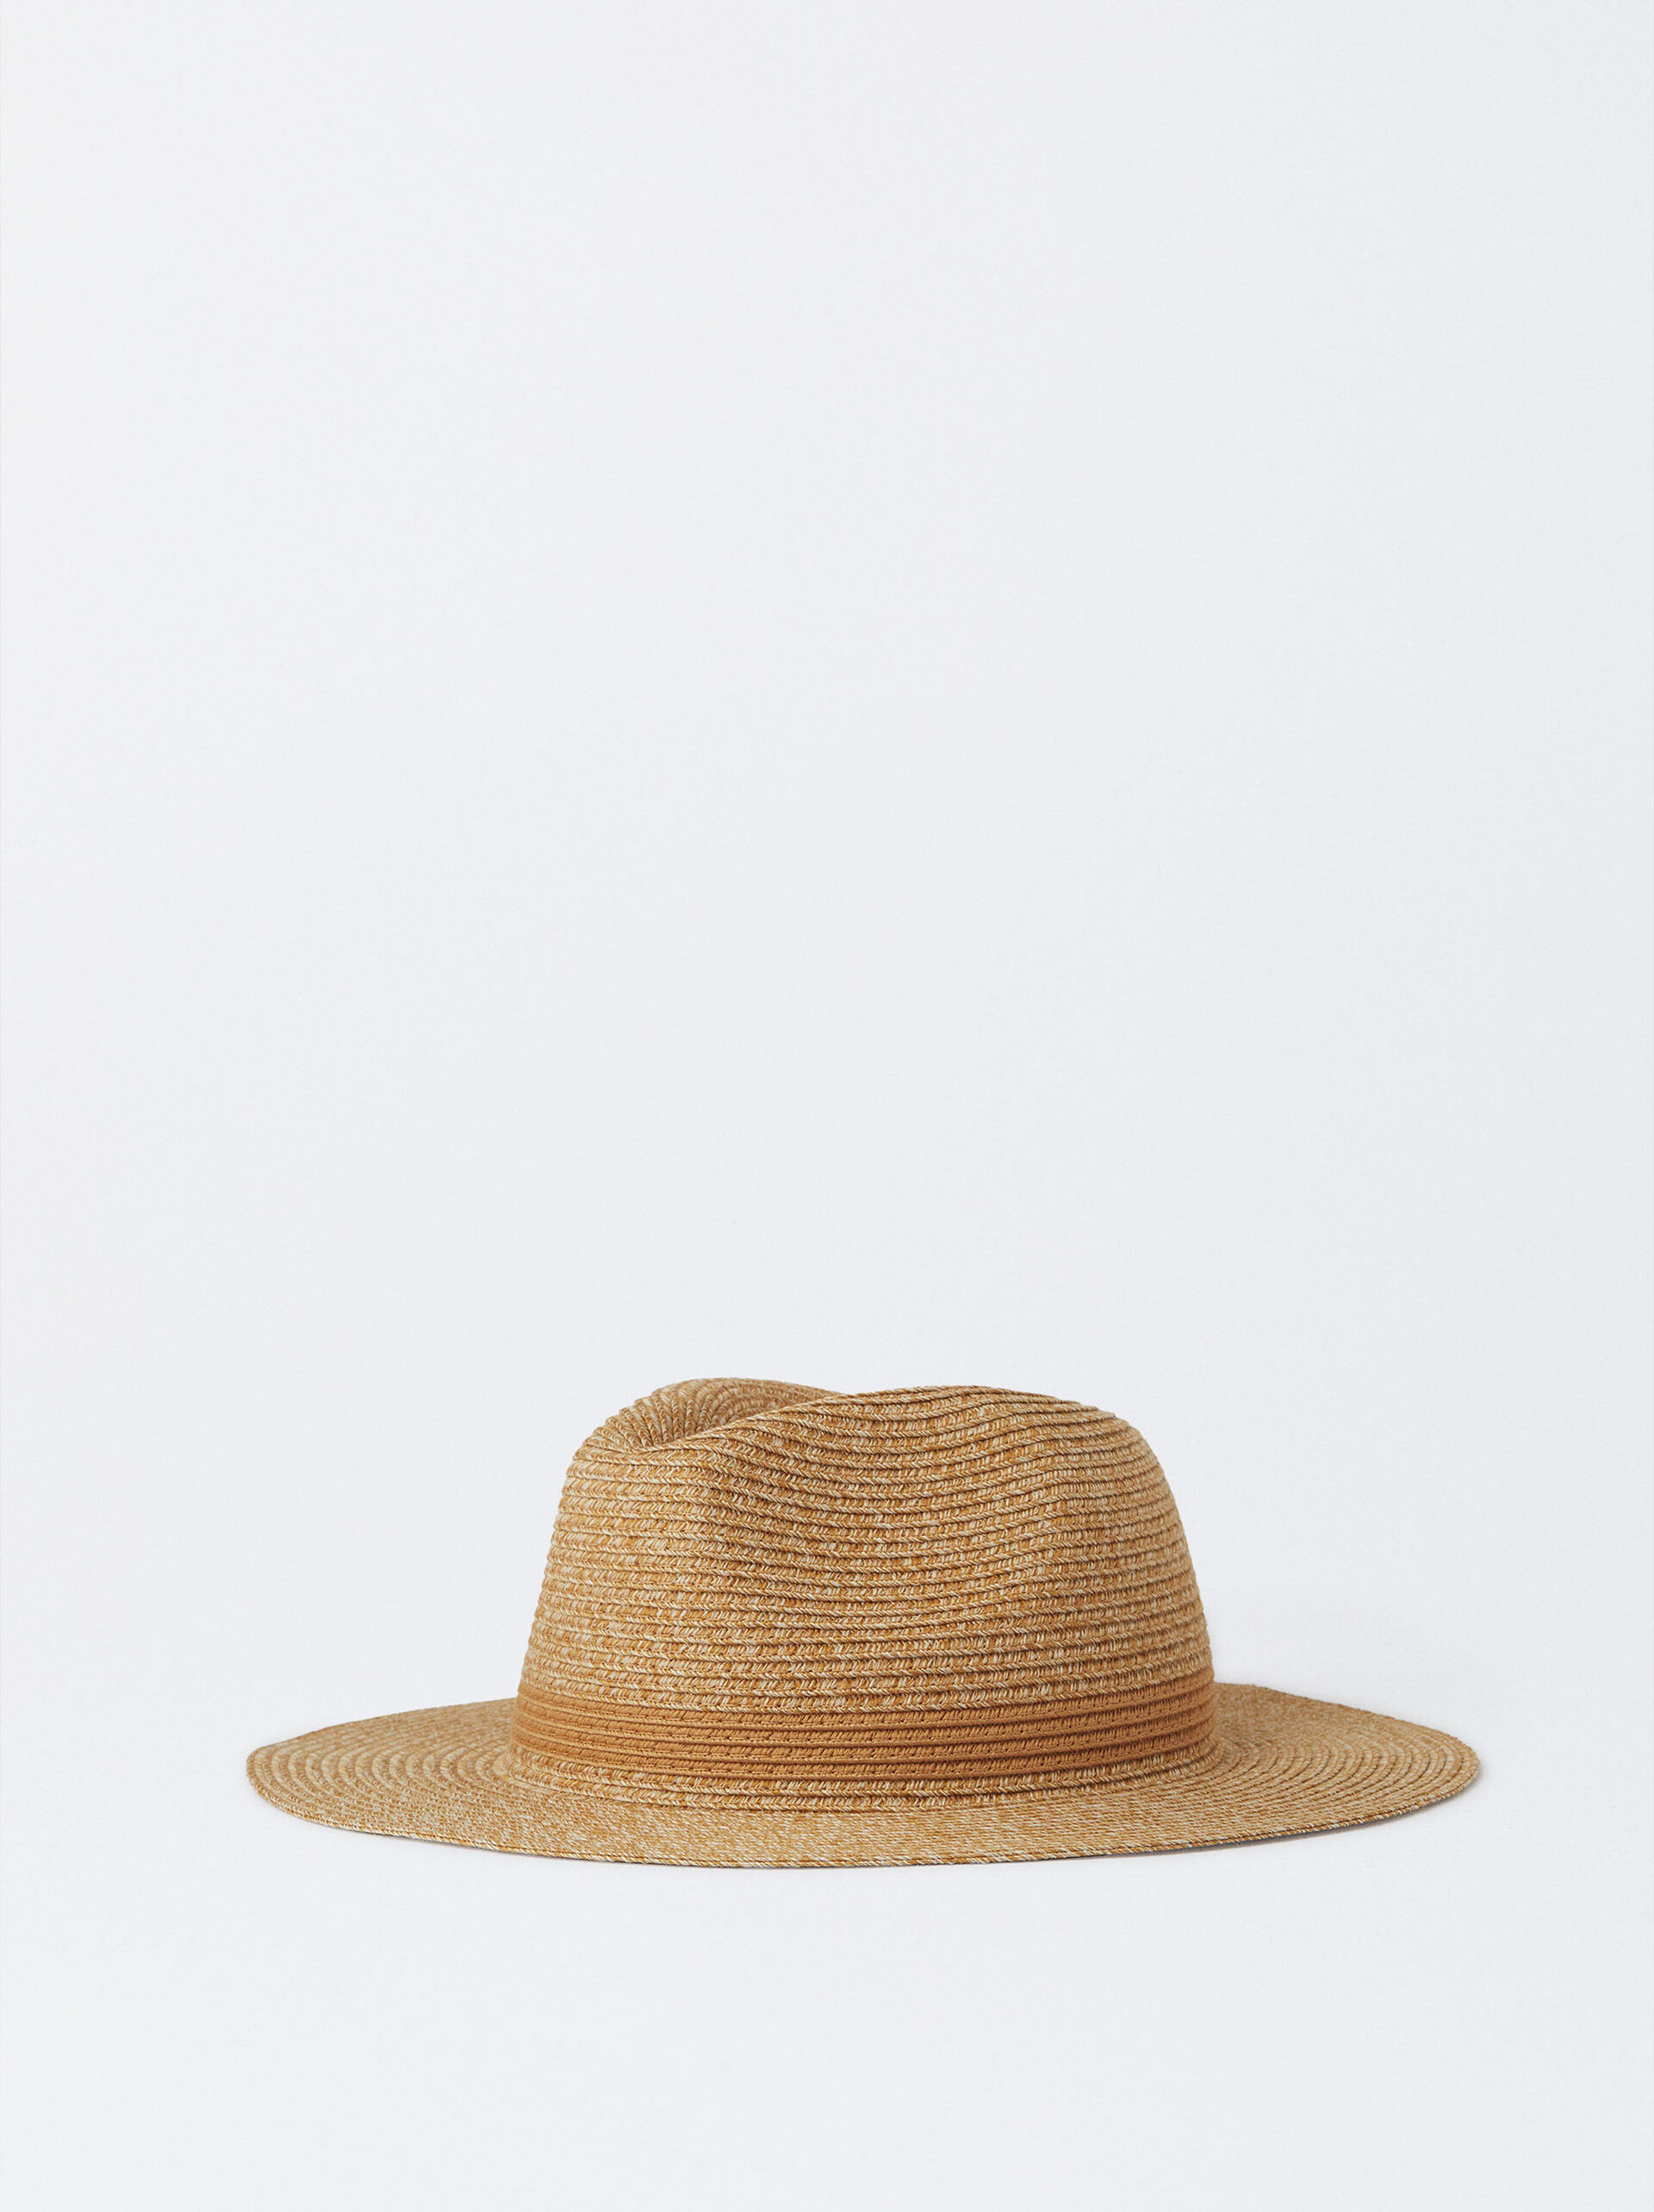 Woven Hat image number 0.0